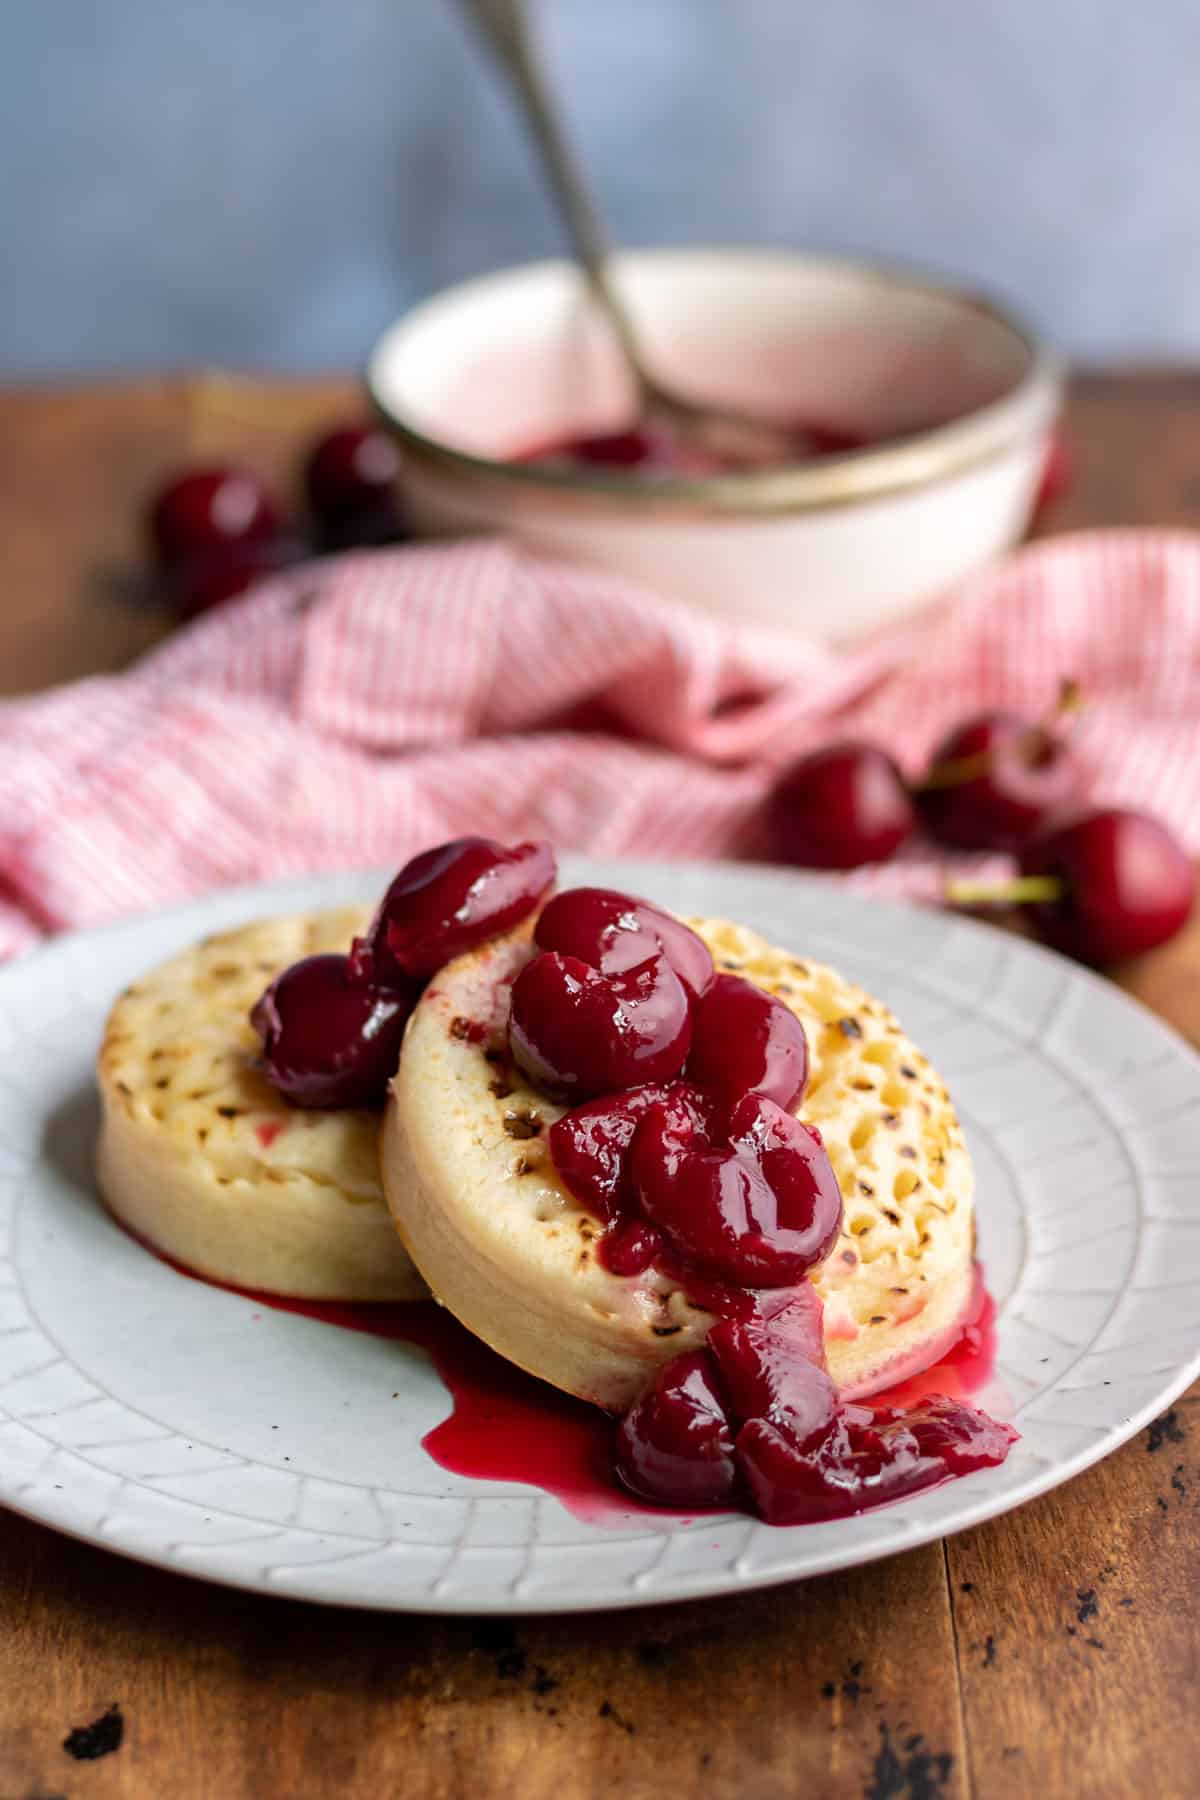 Plate of crumpets drizzled with cherry compote.